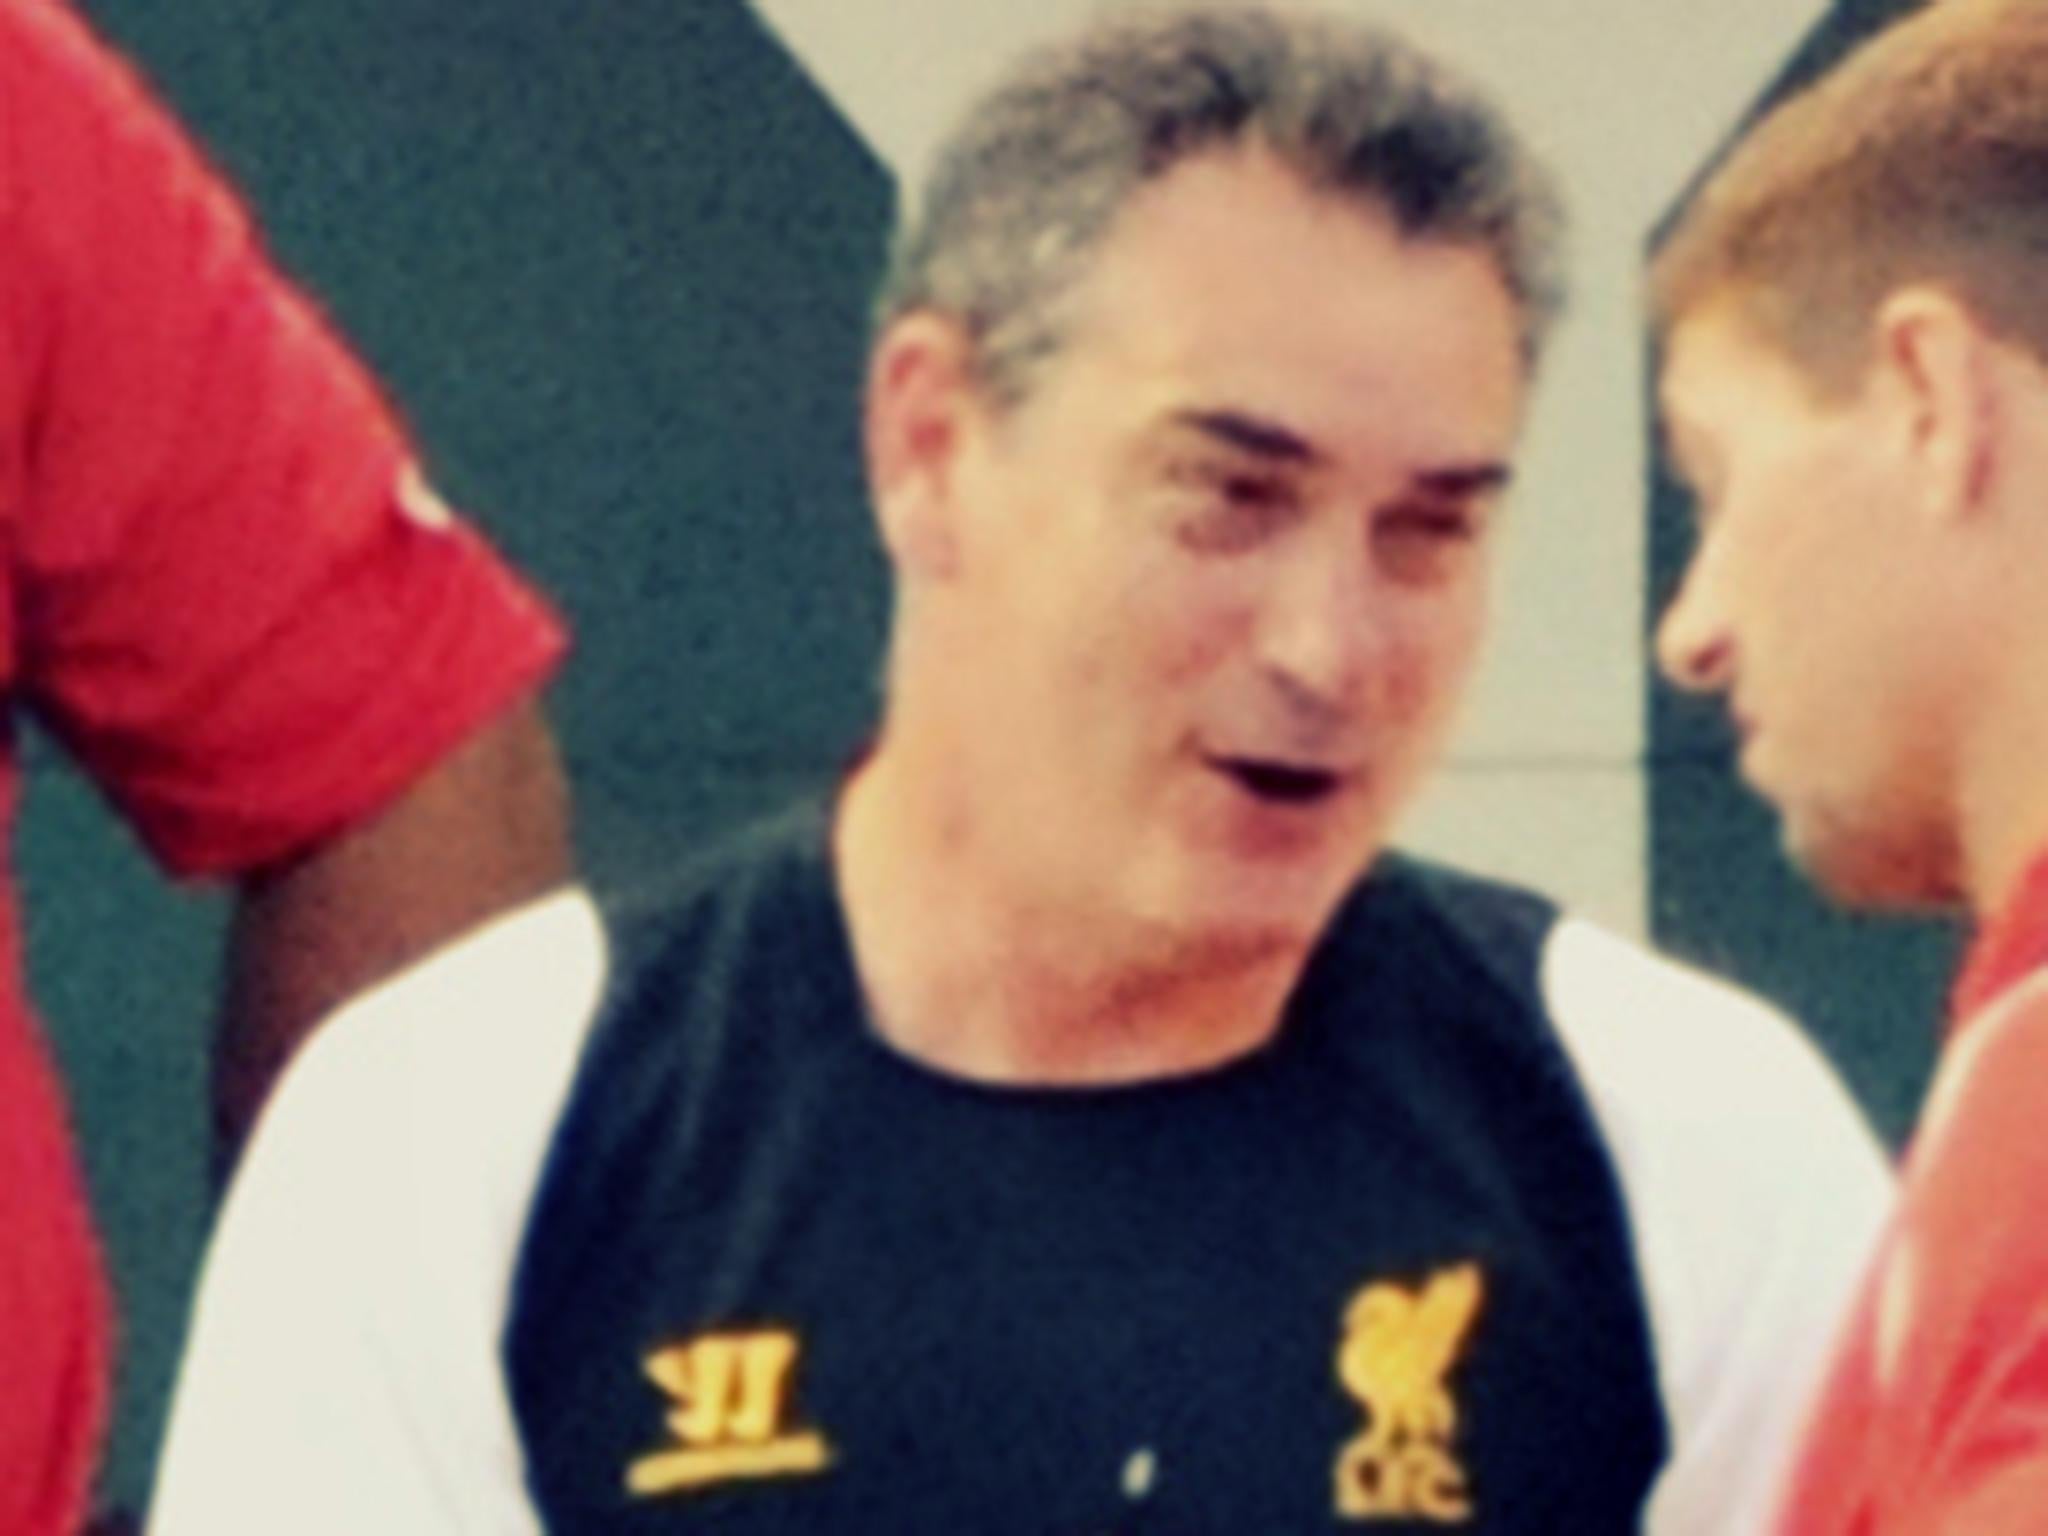 Pep Segura, formerly of Liverpool, could return to the UK with Arsenal